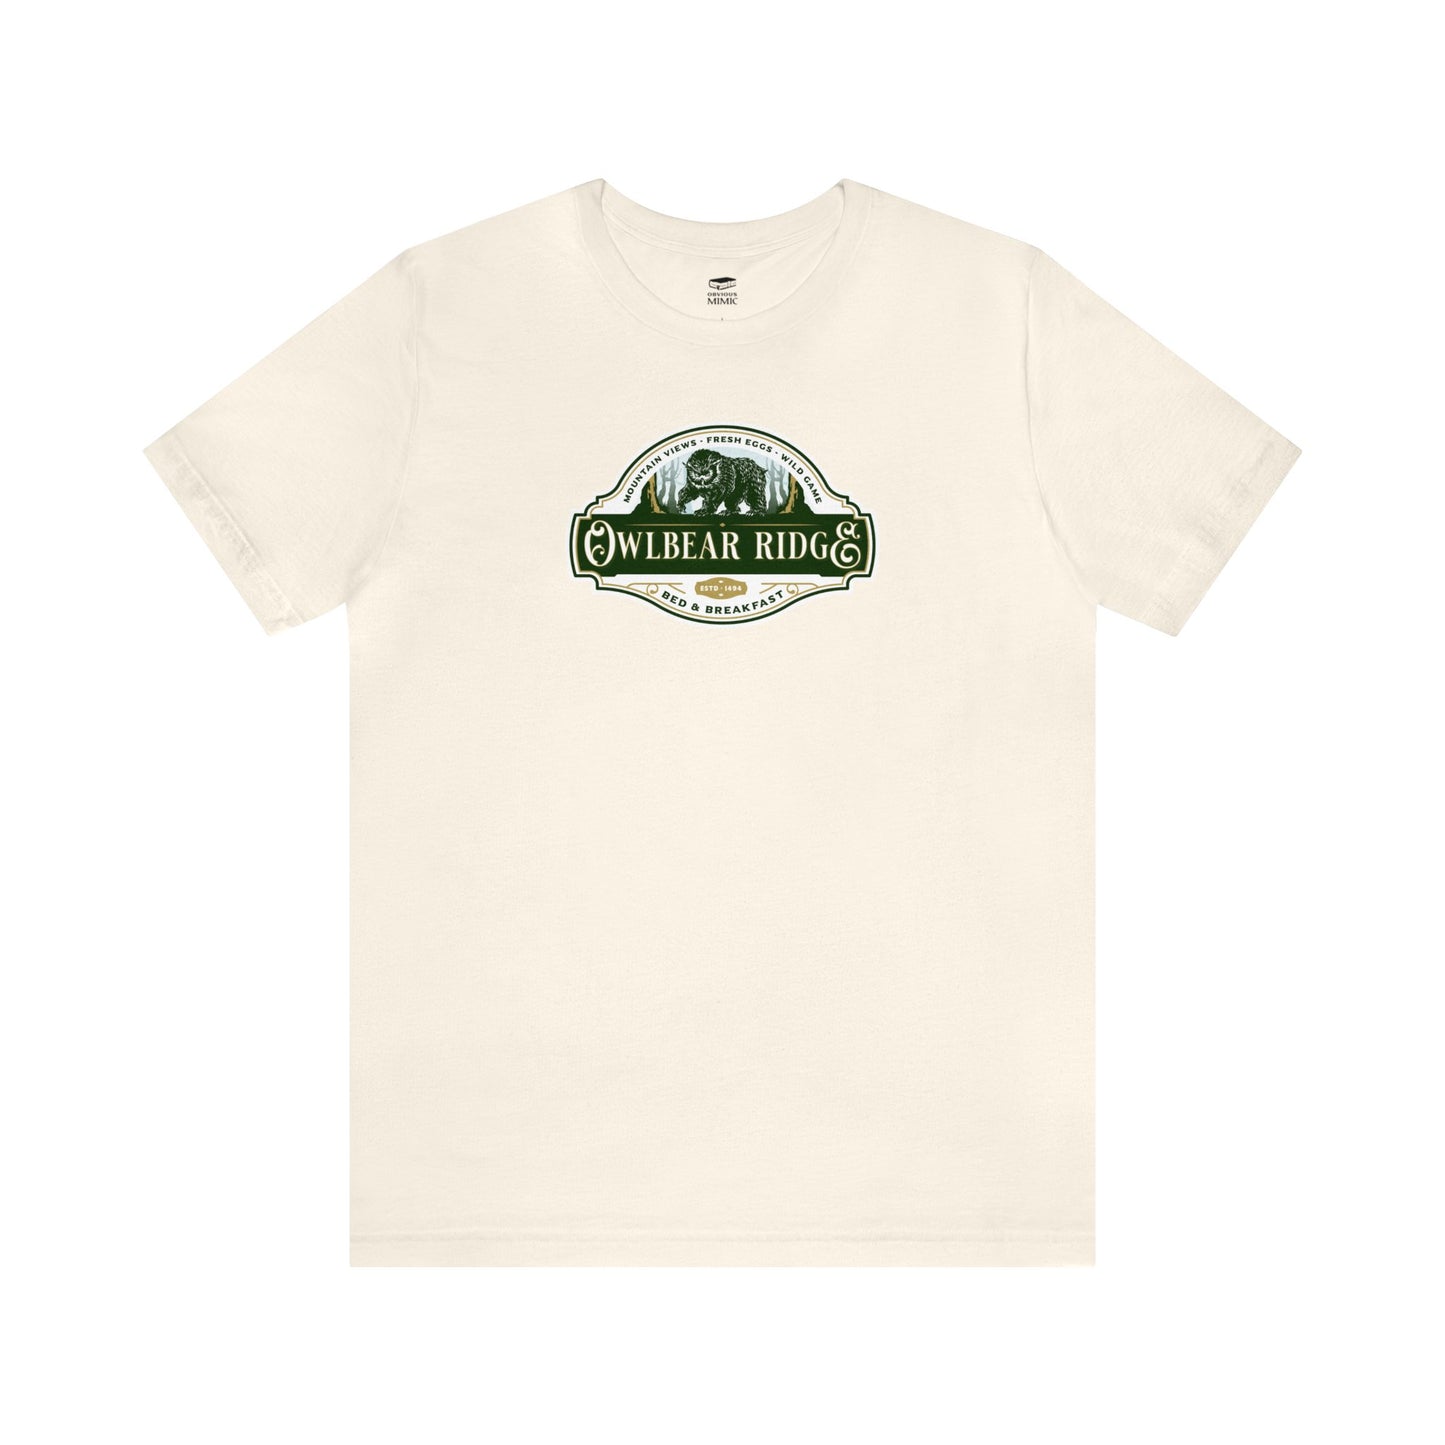 Owlbear Ridge Bed and Breakfast | Side Hustle Collection | Retail Fit Fantasy Geek Cotton T-shirt